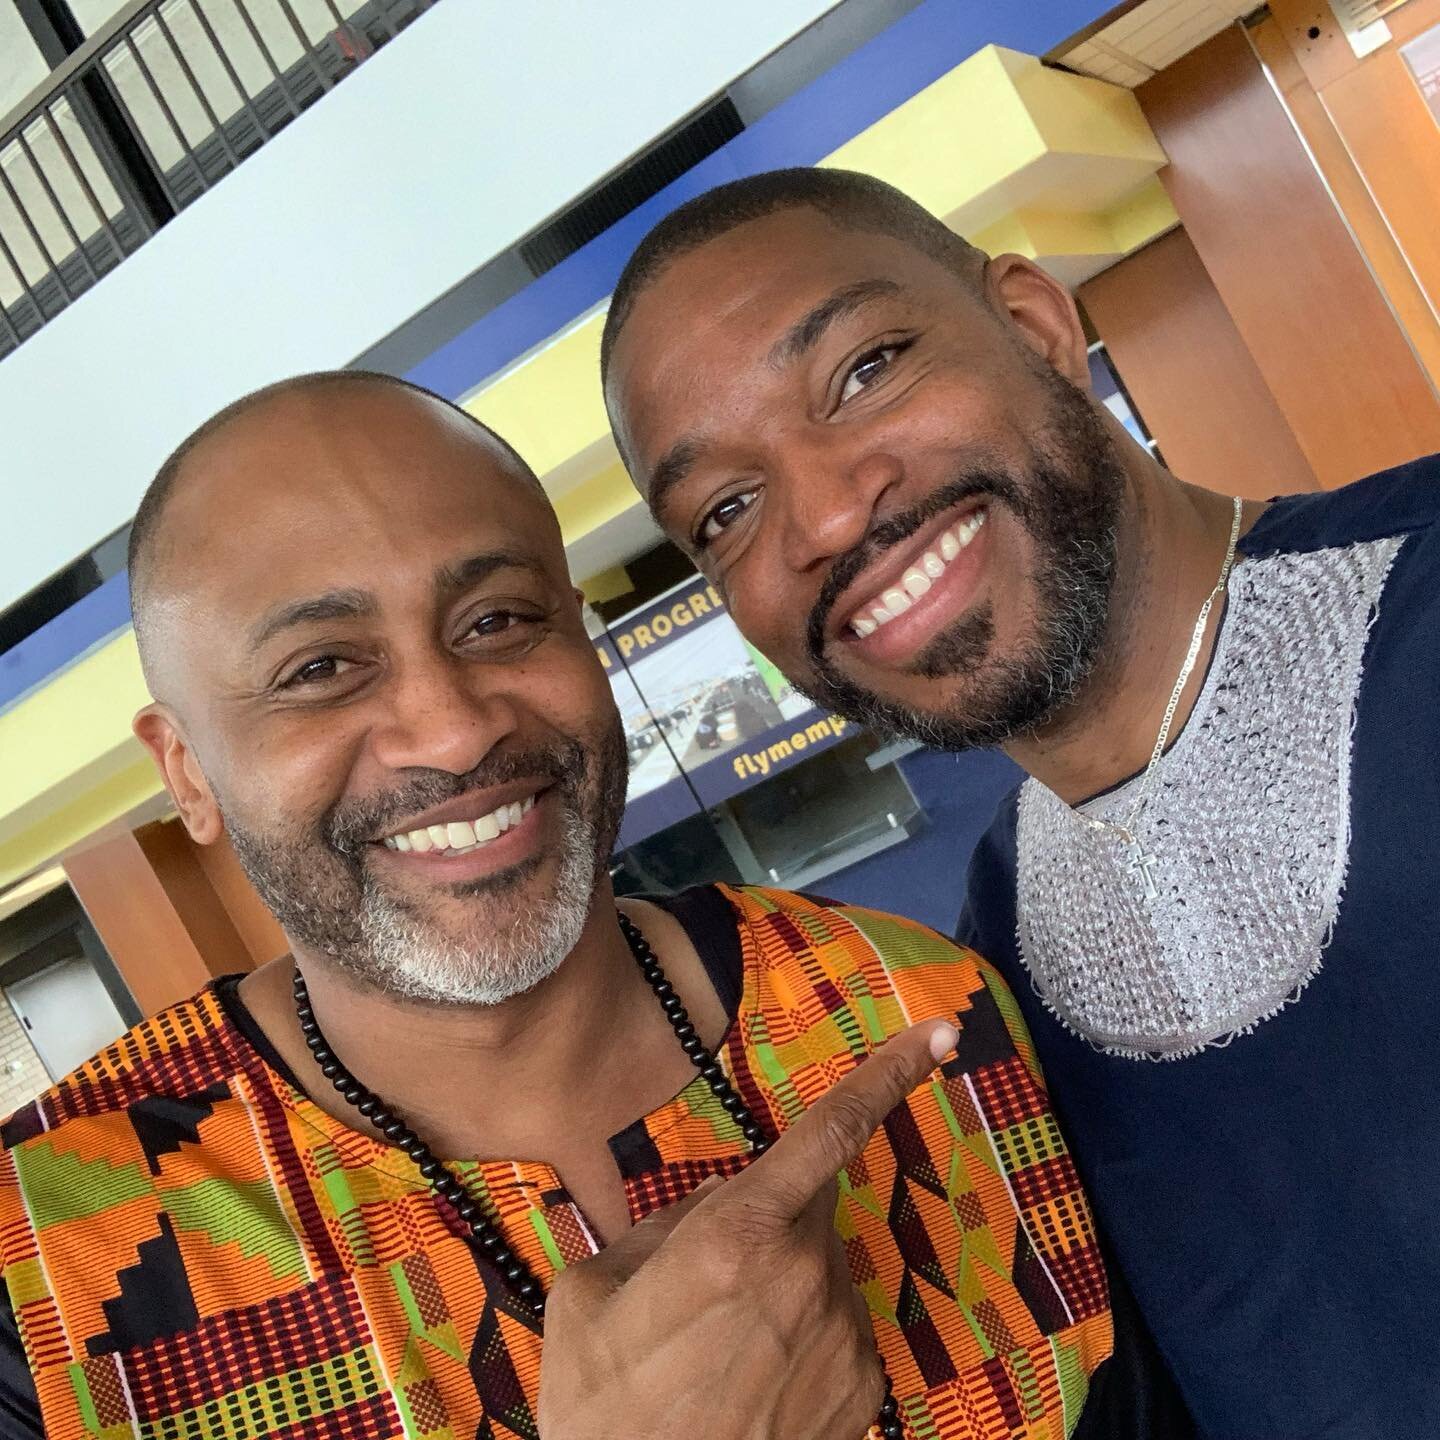 &lsquo;From Memphis, Ten
And then back again
Make non-rapping MCs
Go home practicing&rsquo;

Spent #Juneteenth building with my brother @pastor_earle #freedomdreaming &amp; reconnecting w/ a great soul I got to serve as a youth pastor years ago. 

#A